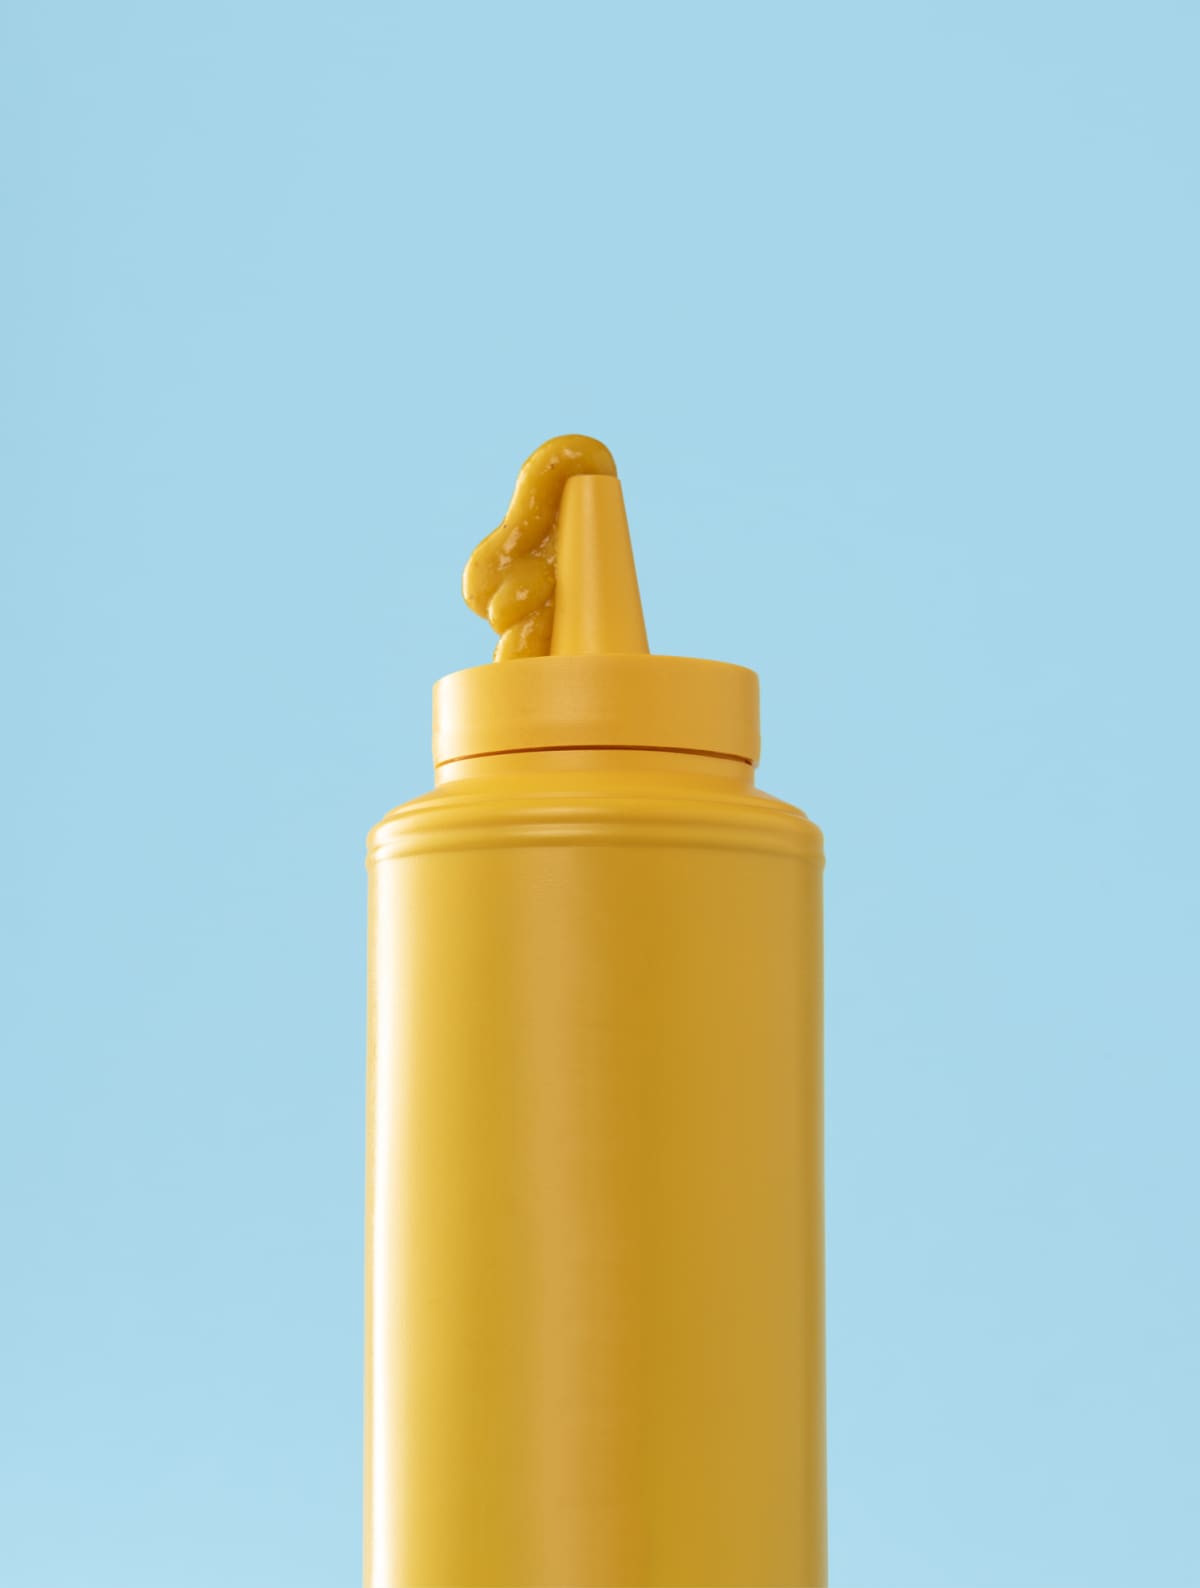 Mustard plastic bottle isolated on a blue background